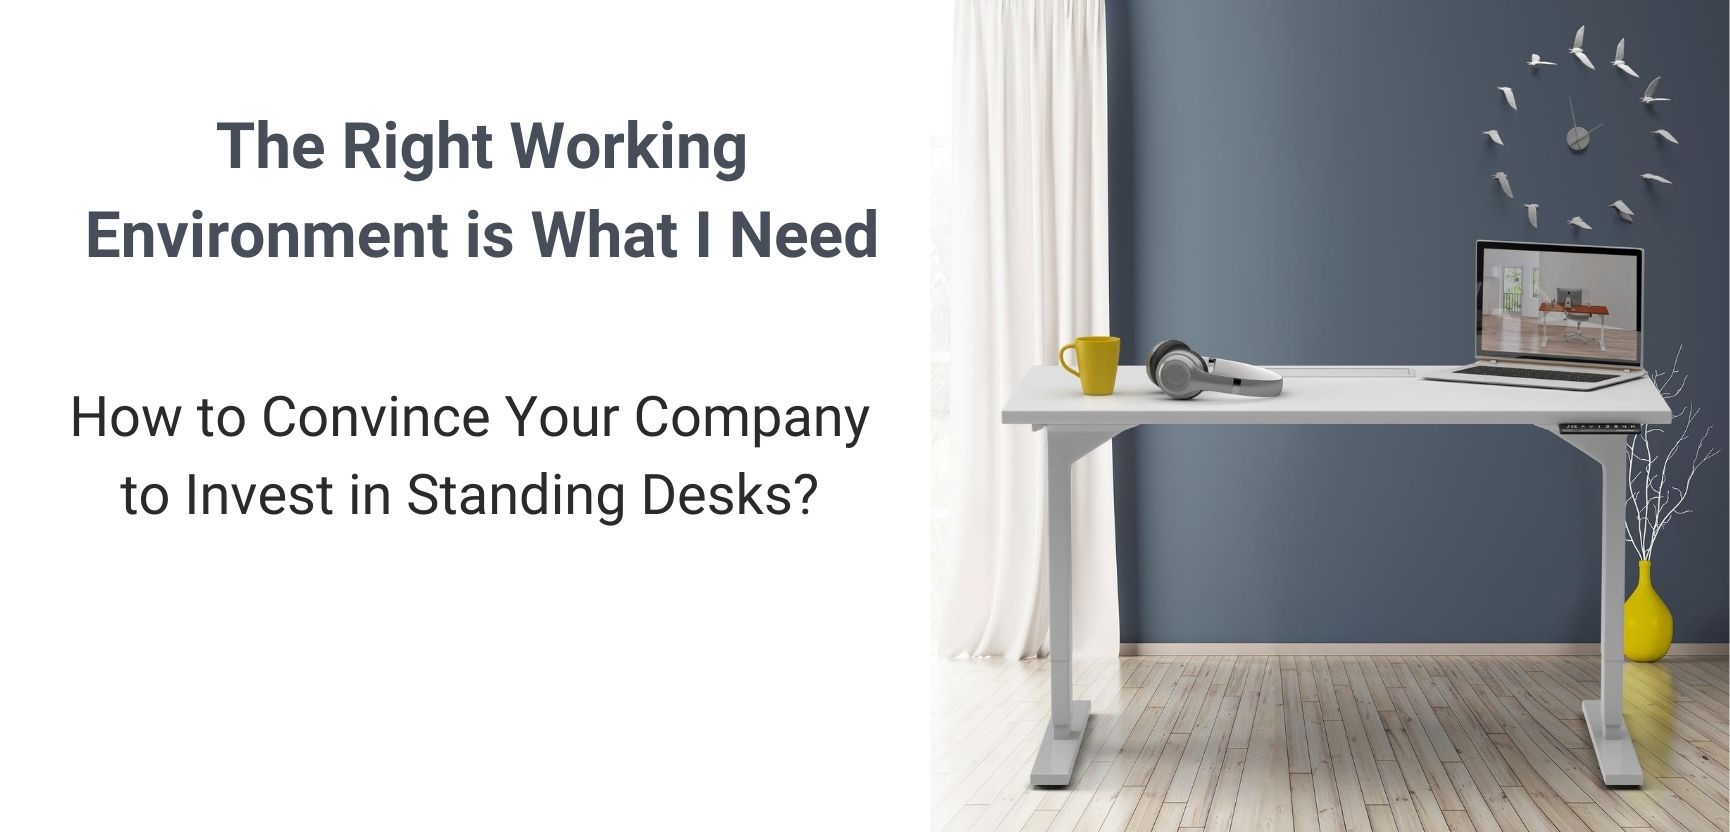 How to Convince Your Company to Swap to Standing Desks